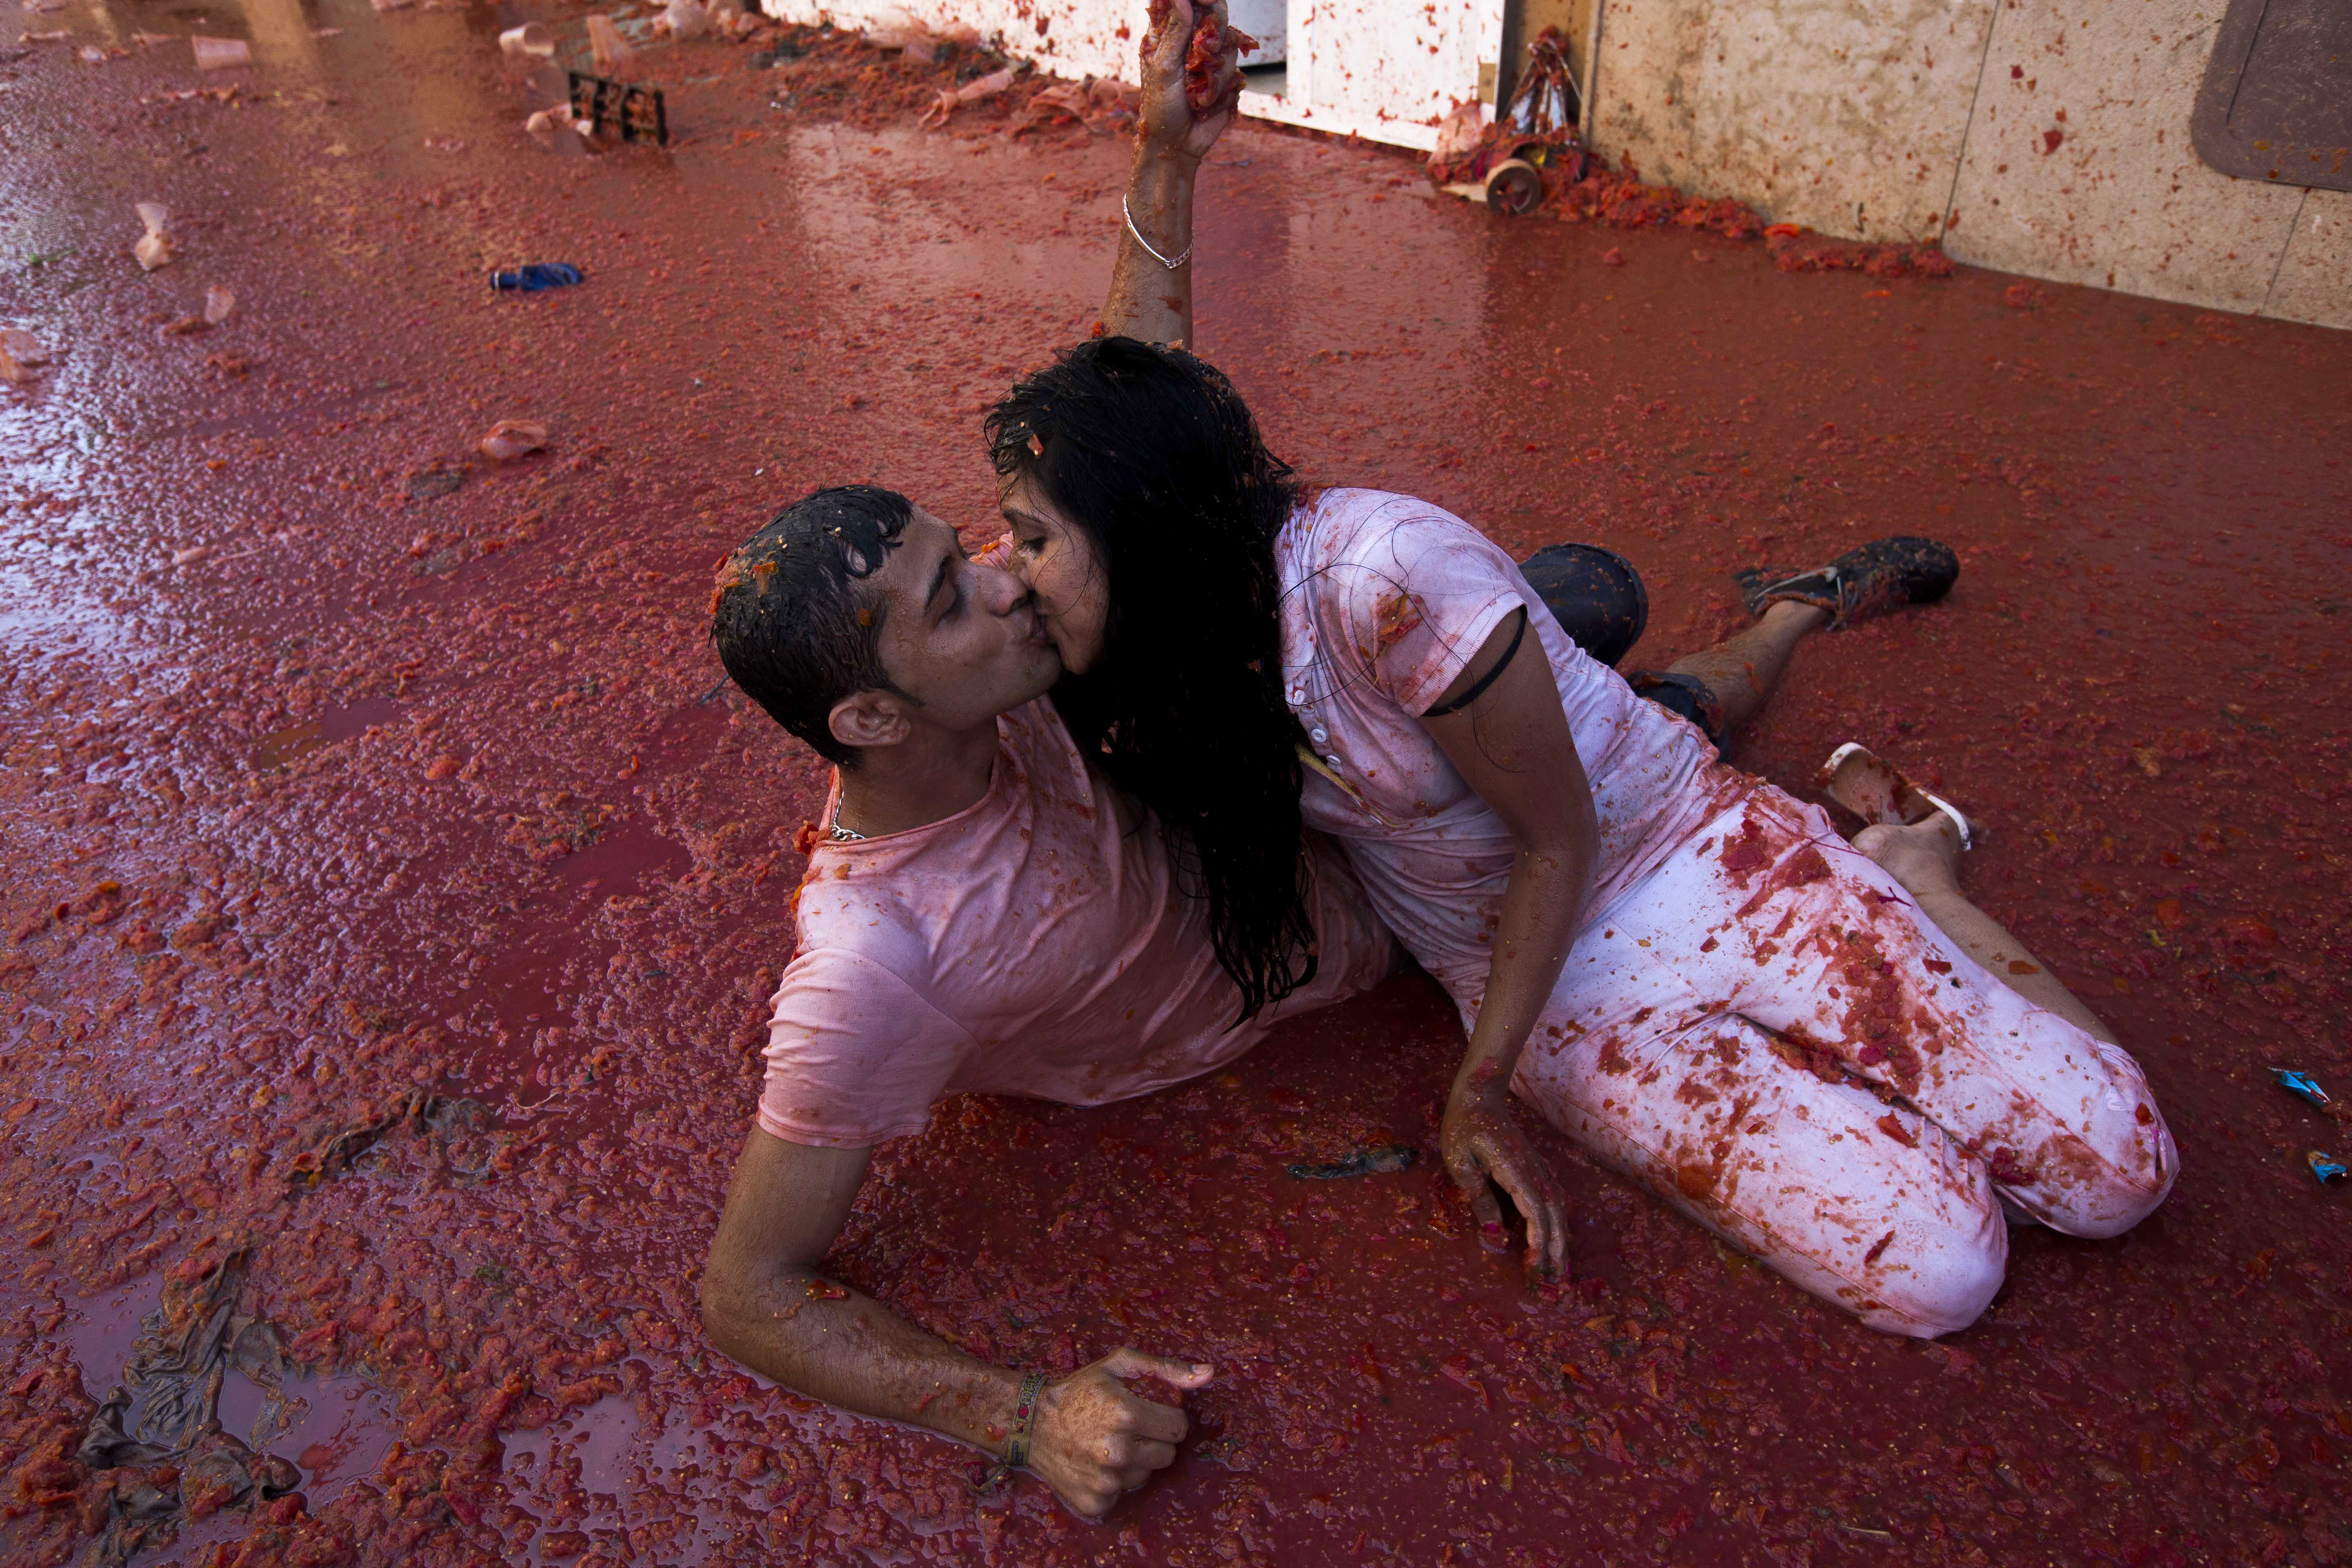 A couple kisses during the annual "tomatina" festivities in the village of Bunol, near Valencia on August 27, 2014. Some 22,000 revellers hurled 130 tonnes of squashed tomatoes at each other drenching the streets in red in a gigantic Spanish food fight known as the Tomatina. AFP PHOTO / GABRIEL GALLO